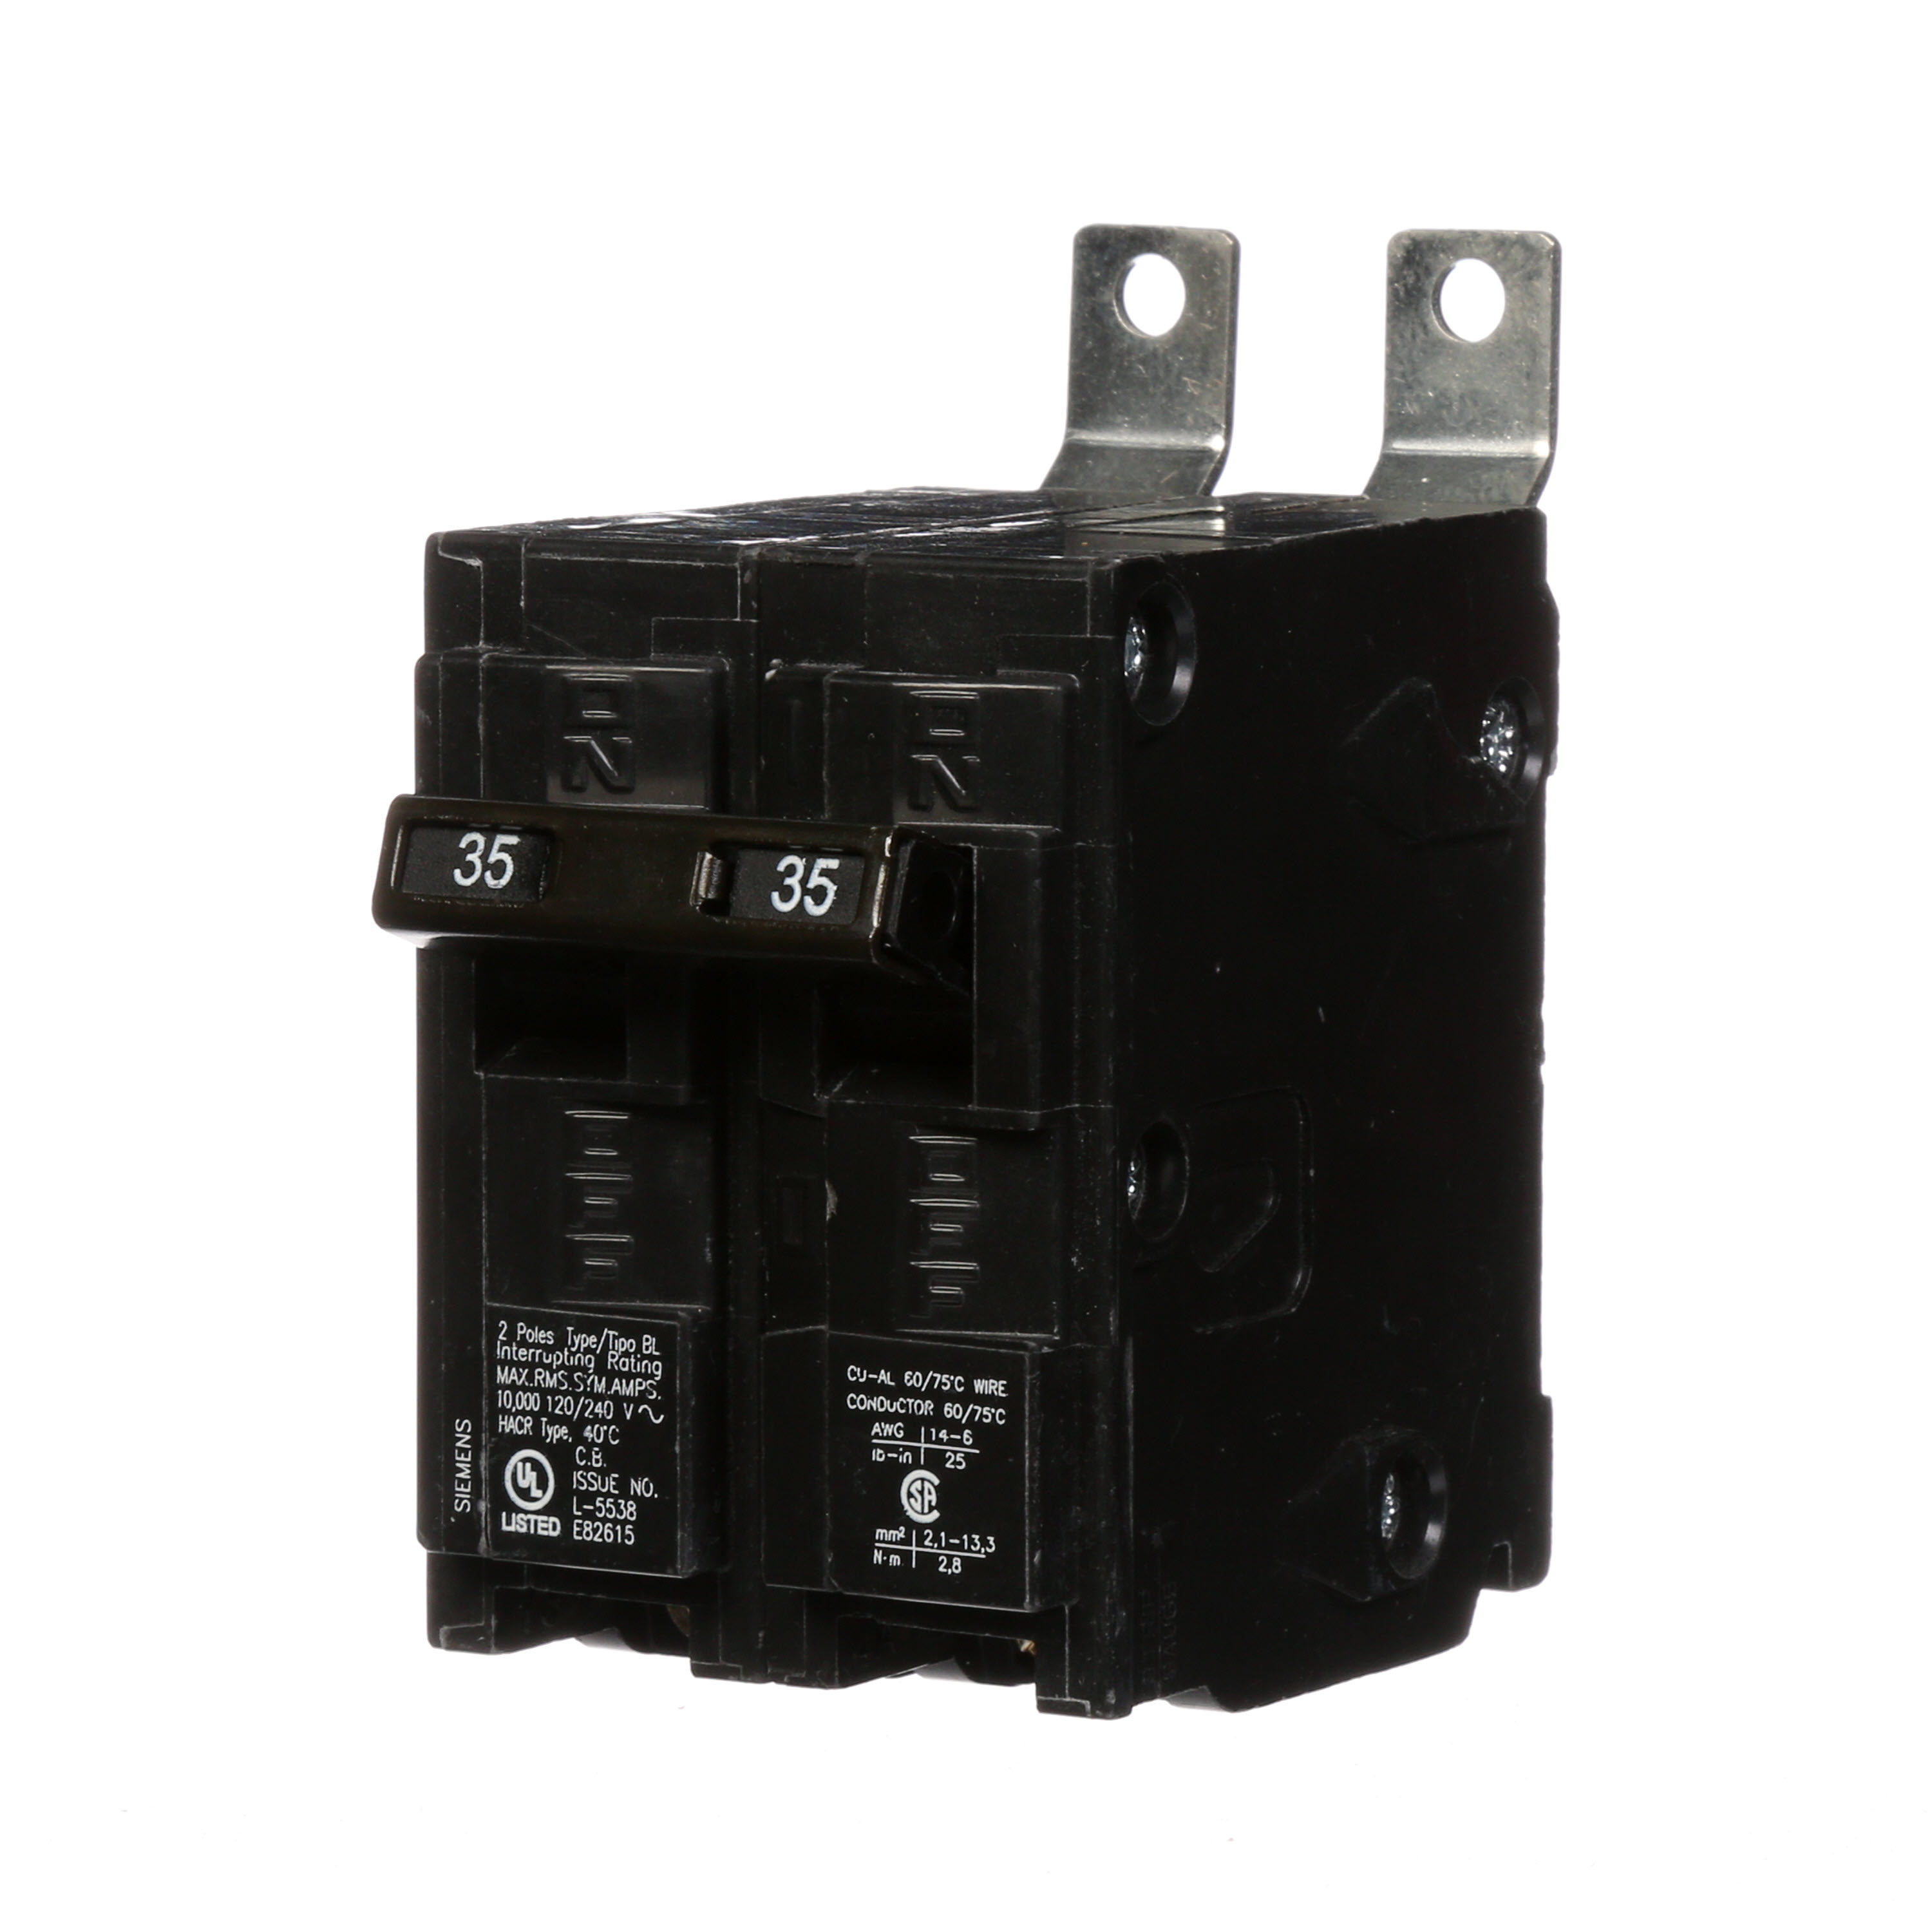 Siemens Low Voltage Molded Case Circuit Breakers Panelboard Mounting 240V Circuit Breakers - Type BL, 2-Pole, 120/240VAC are Circuit Protection Molded Case Circuit Breakers. Type BL Application Electrical Distribution Standard UL 489 Voltage Rating 120/240V Am perage Rating 35A Trip Range Thermal Magnetic Interrupt Rating 10 AIC Number Of Poles 2P